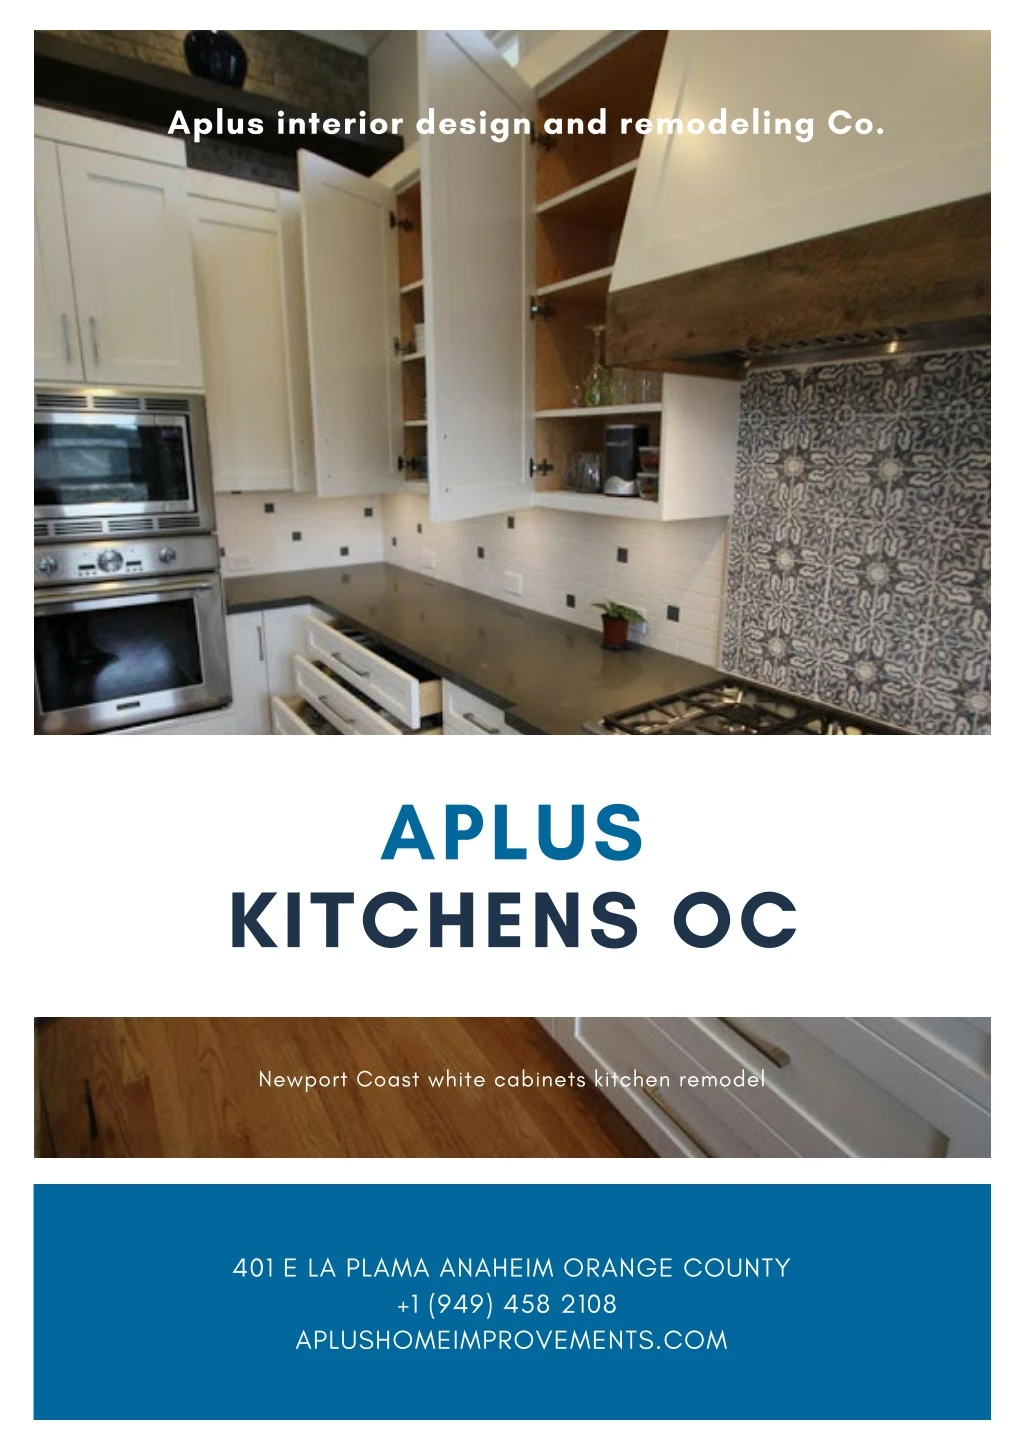 aplus interior design and remodeling co